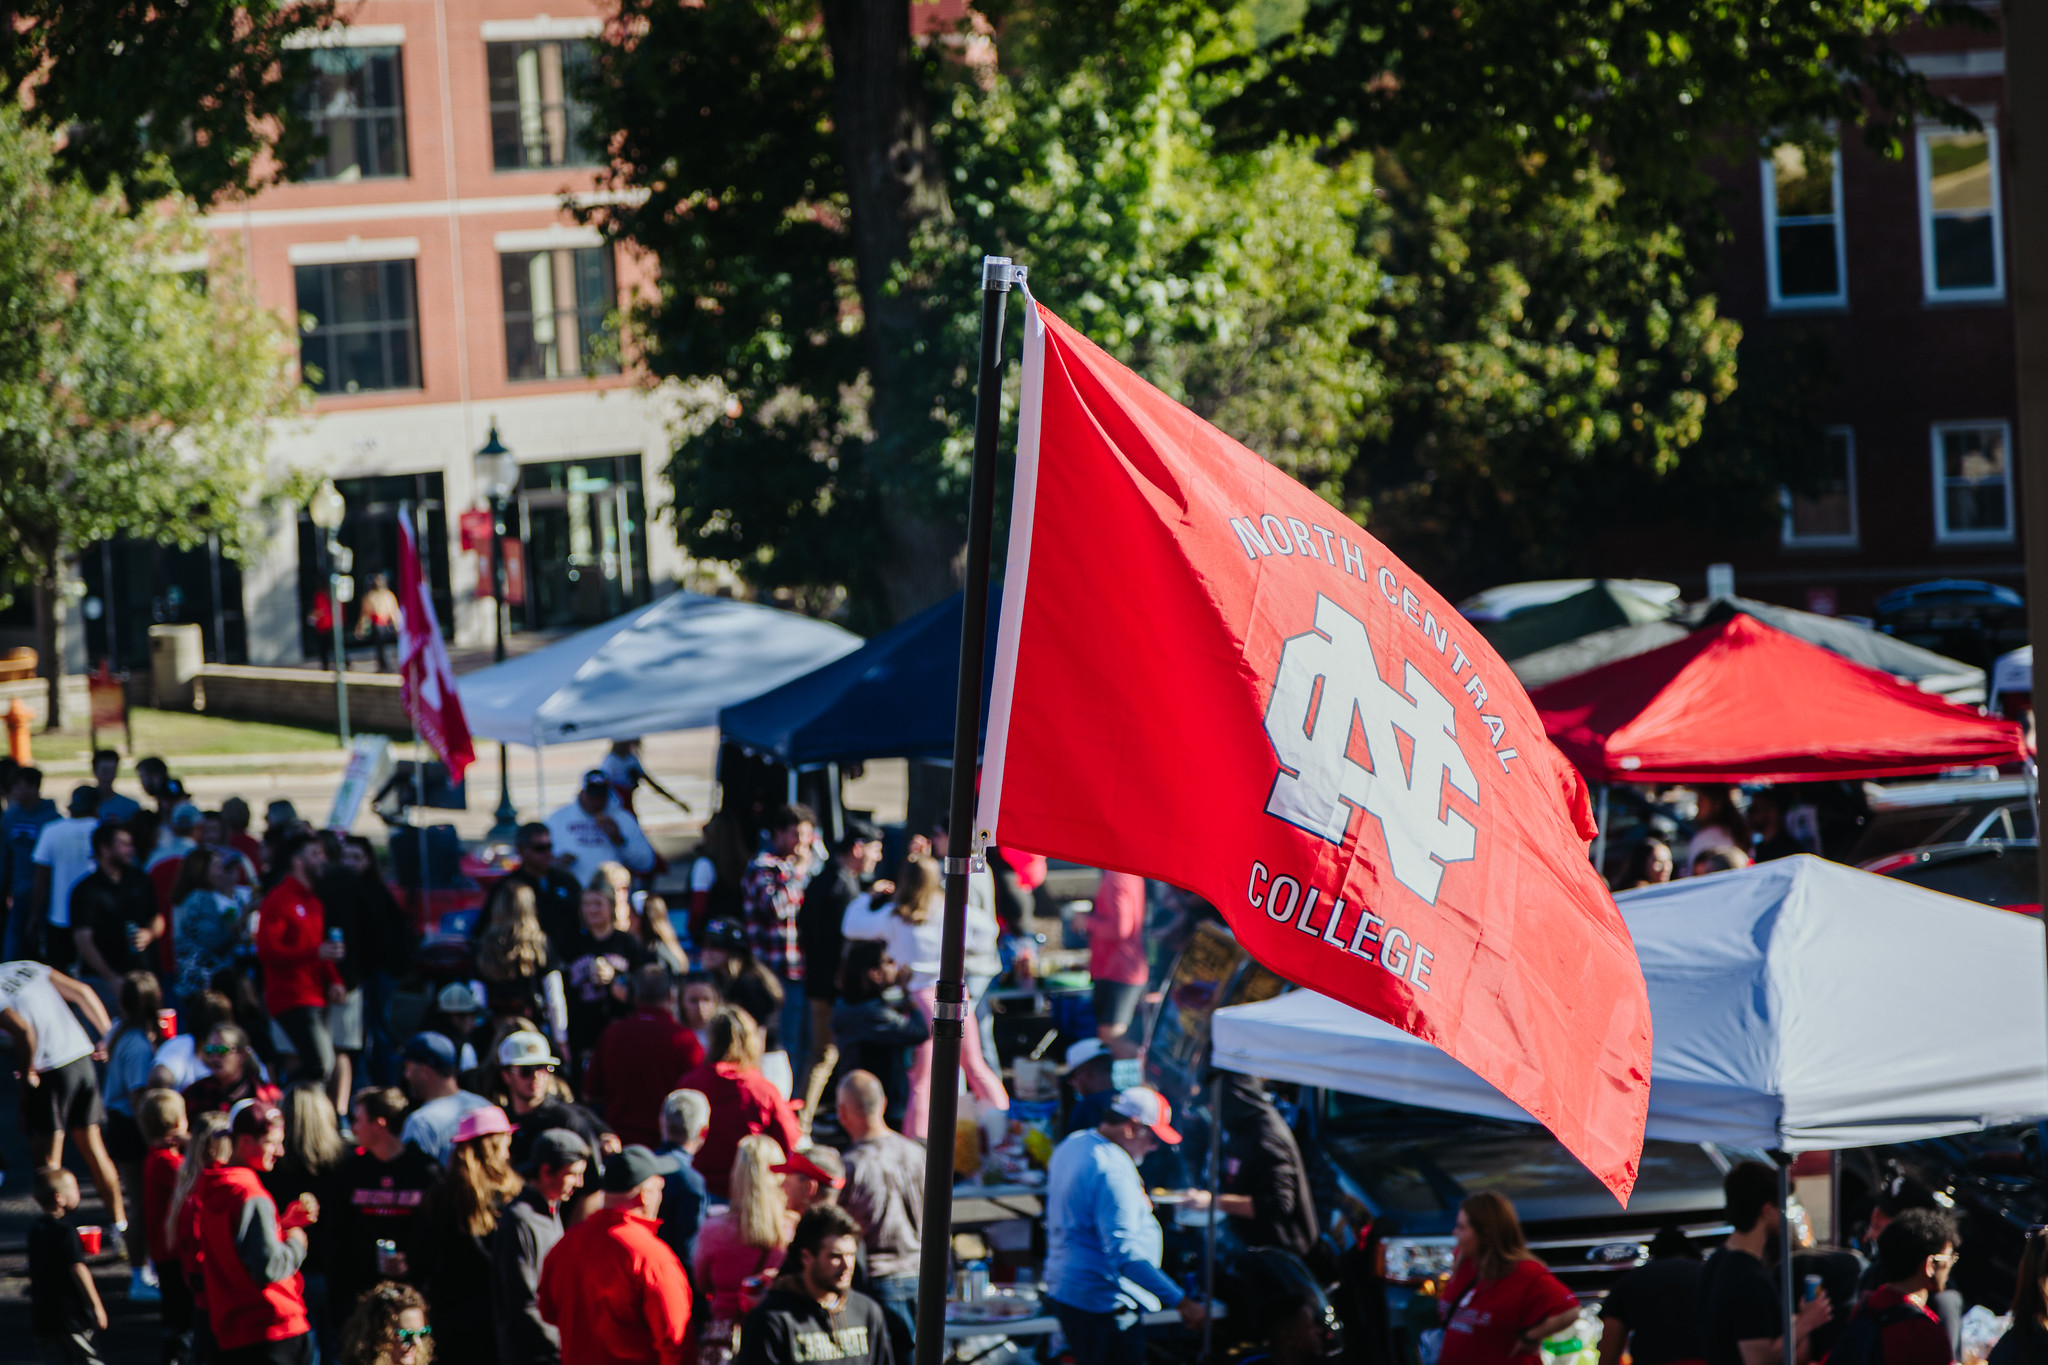 The North Central College flag being waved in the tailgates at Homecoming.